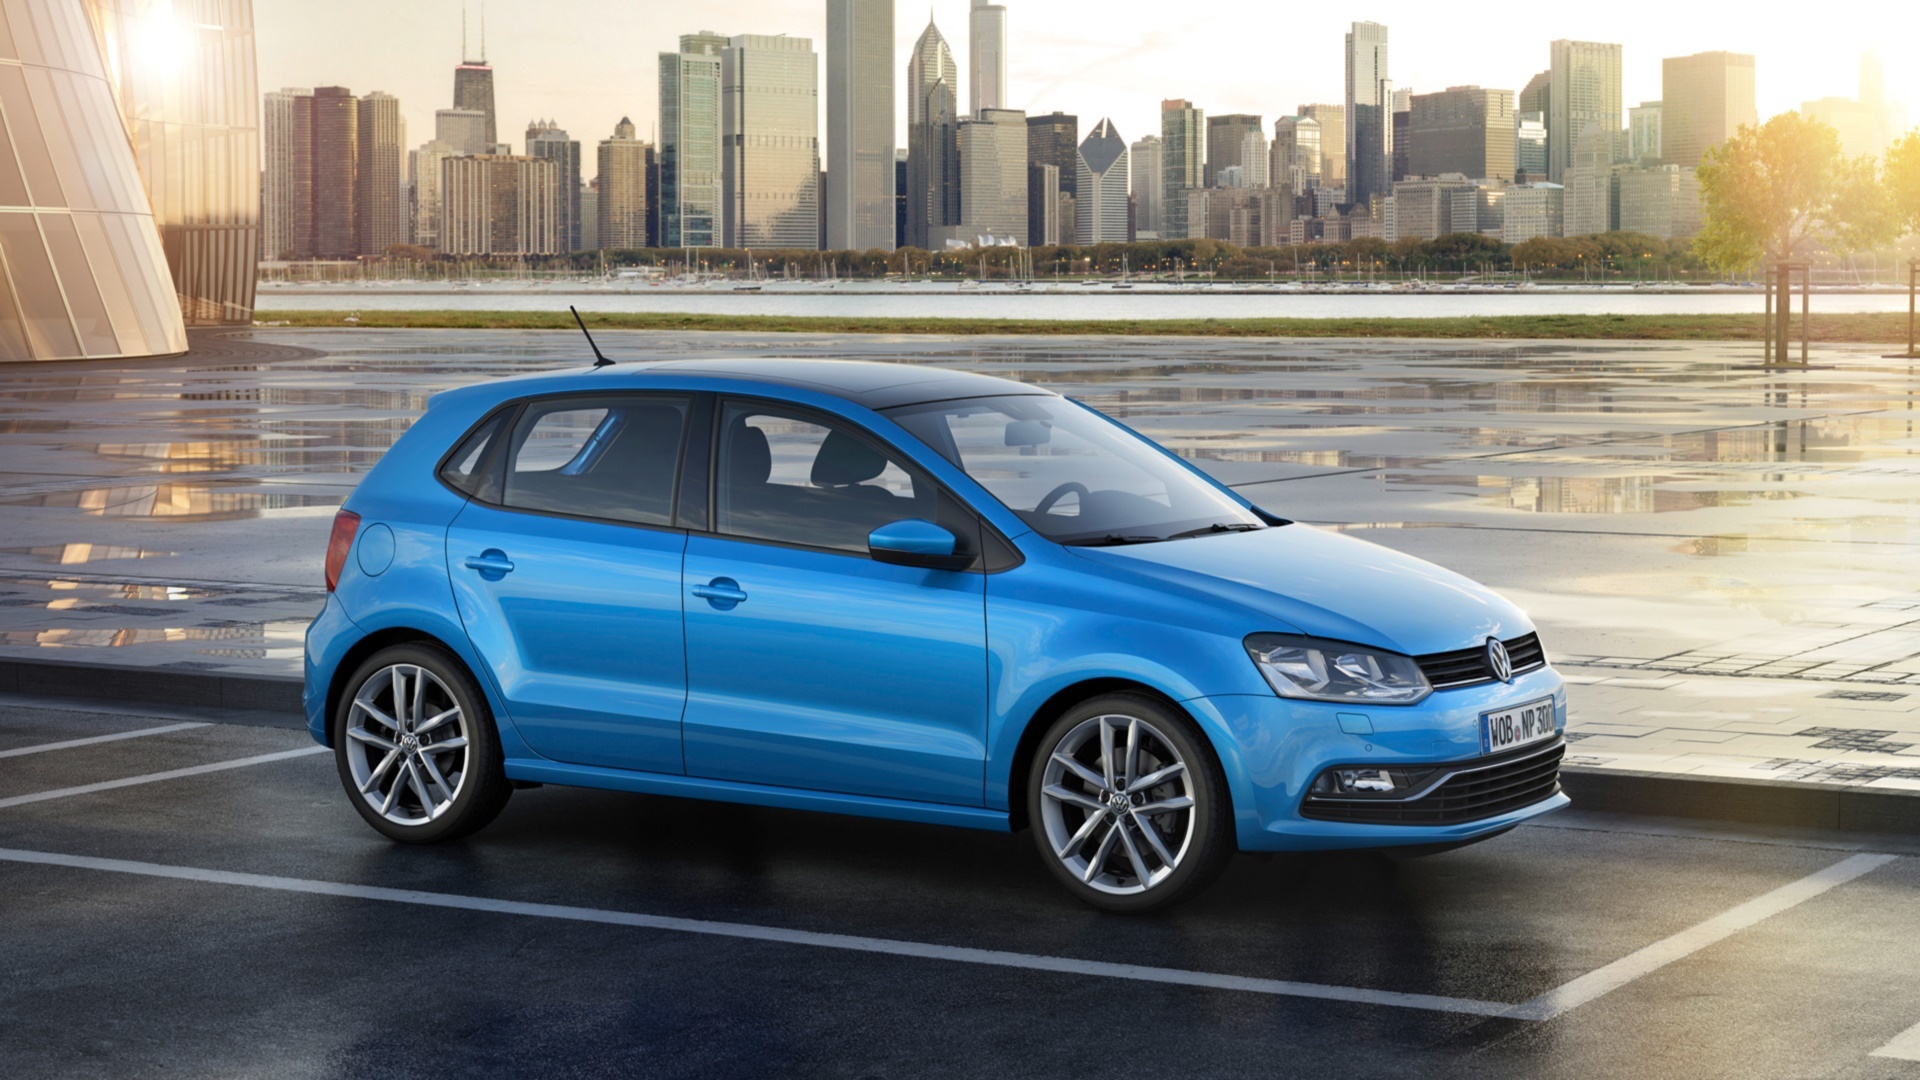 Volkswagen Polo, HD wallpapers and backgrounds, 1920x1080 Full HD Desktop